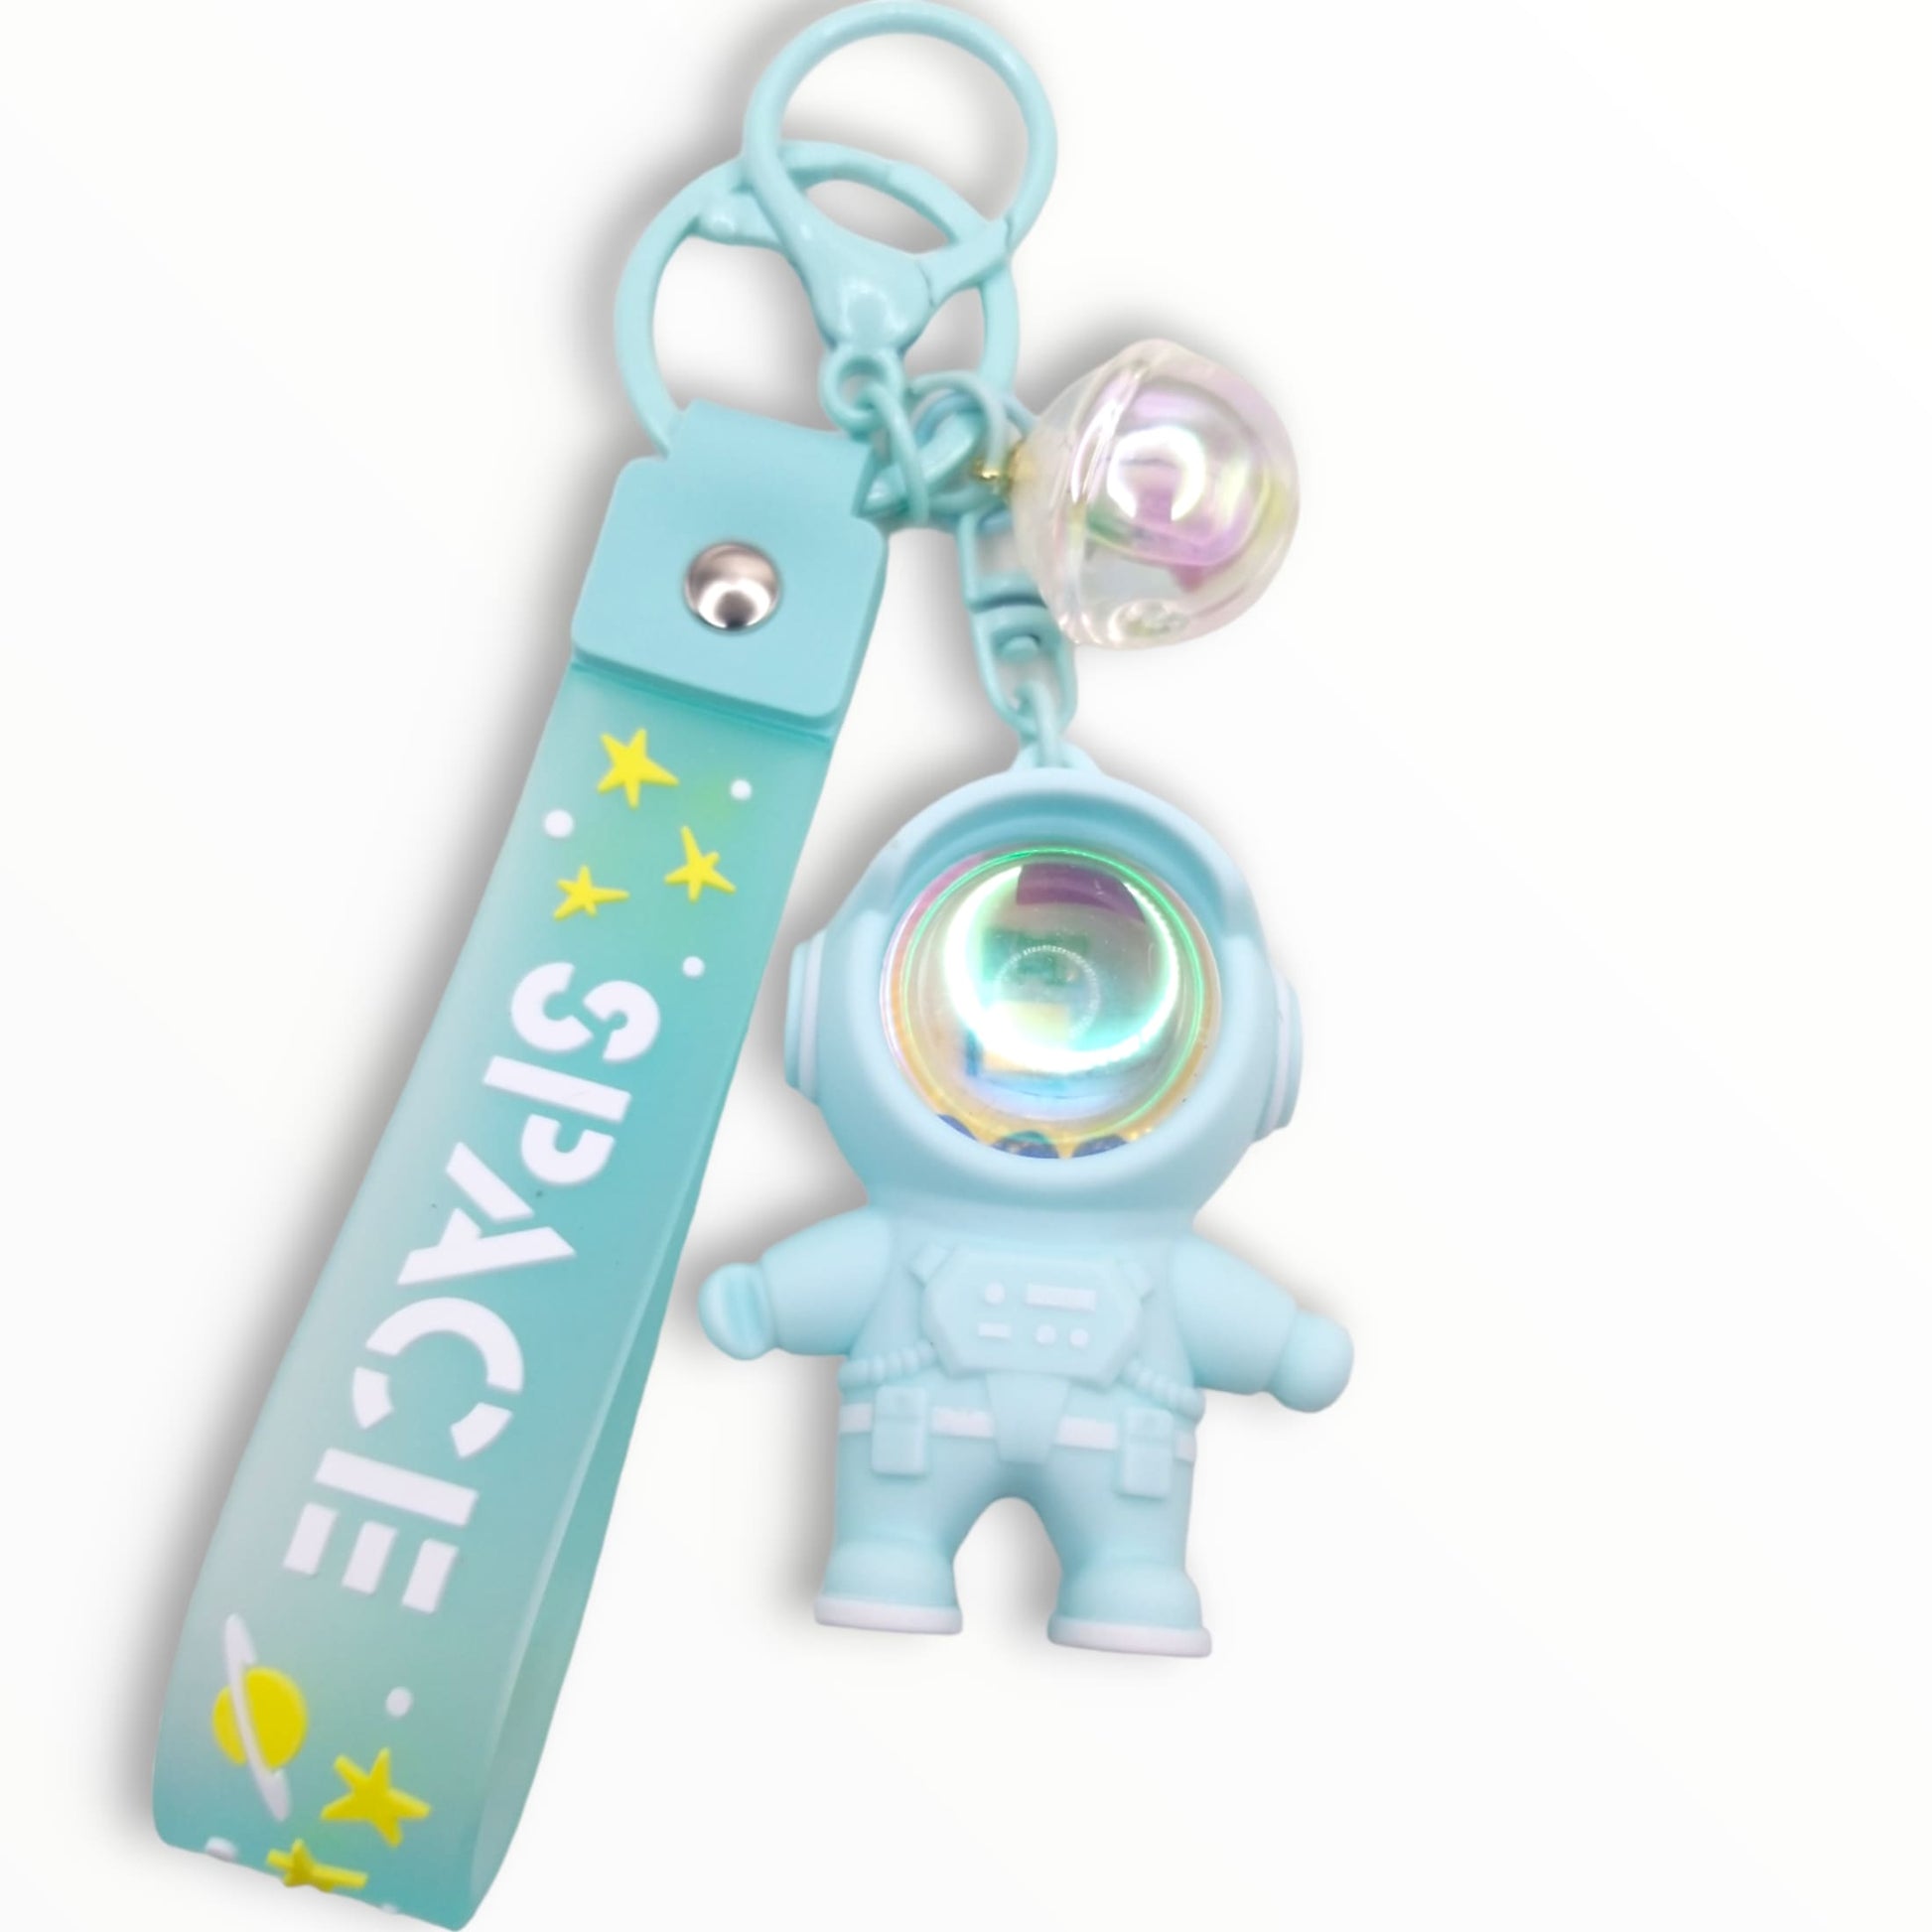 Astronaut Light Up Flashlight Keychain from Confetti Kitty, Only 14.99